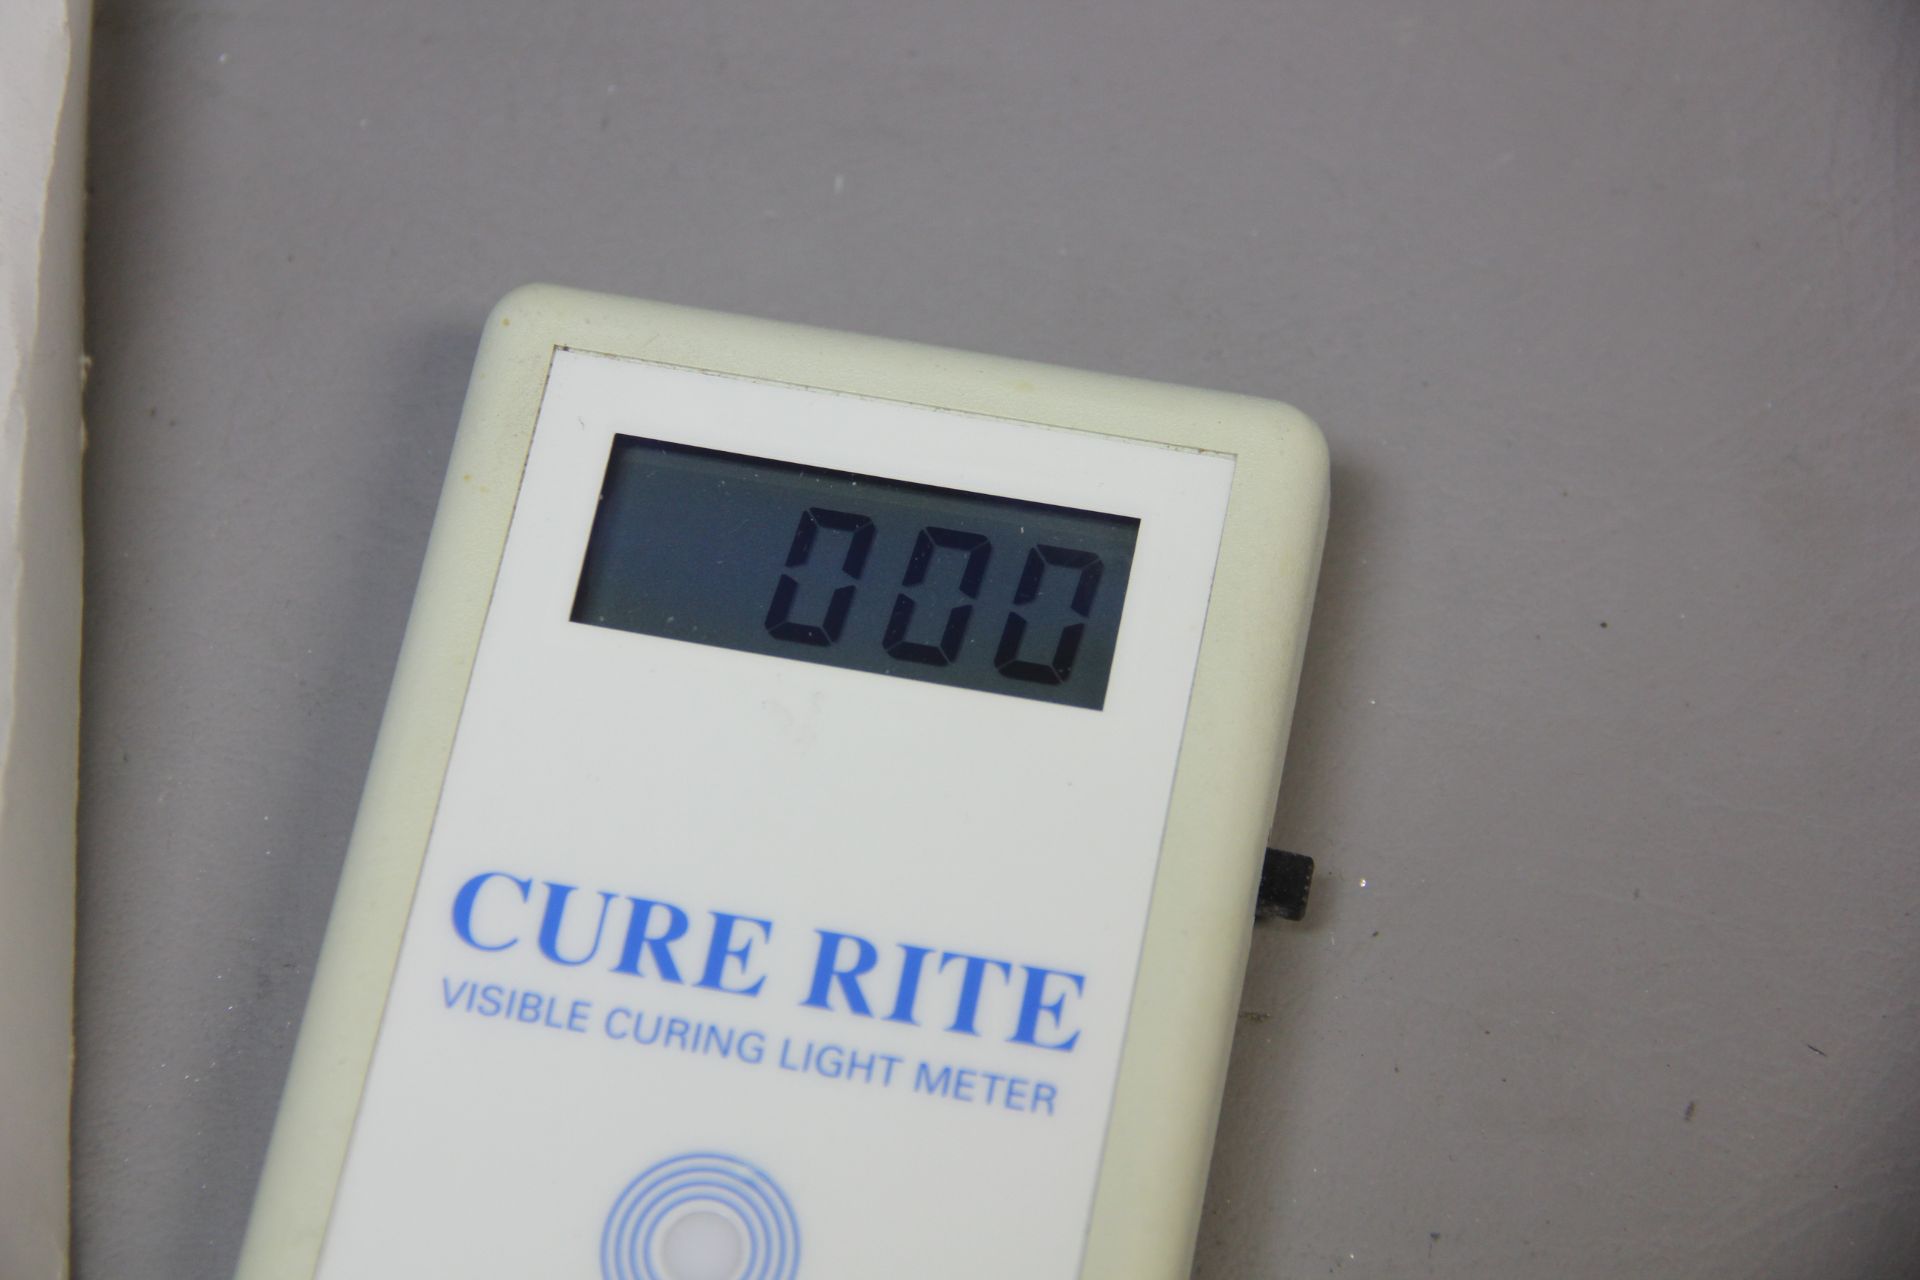 EFOS CURE RITE RADIOMETER VISIBLE CURING LIGHT METER - Image 3 of 5